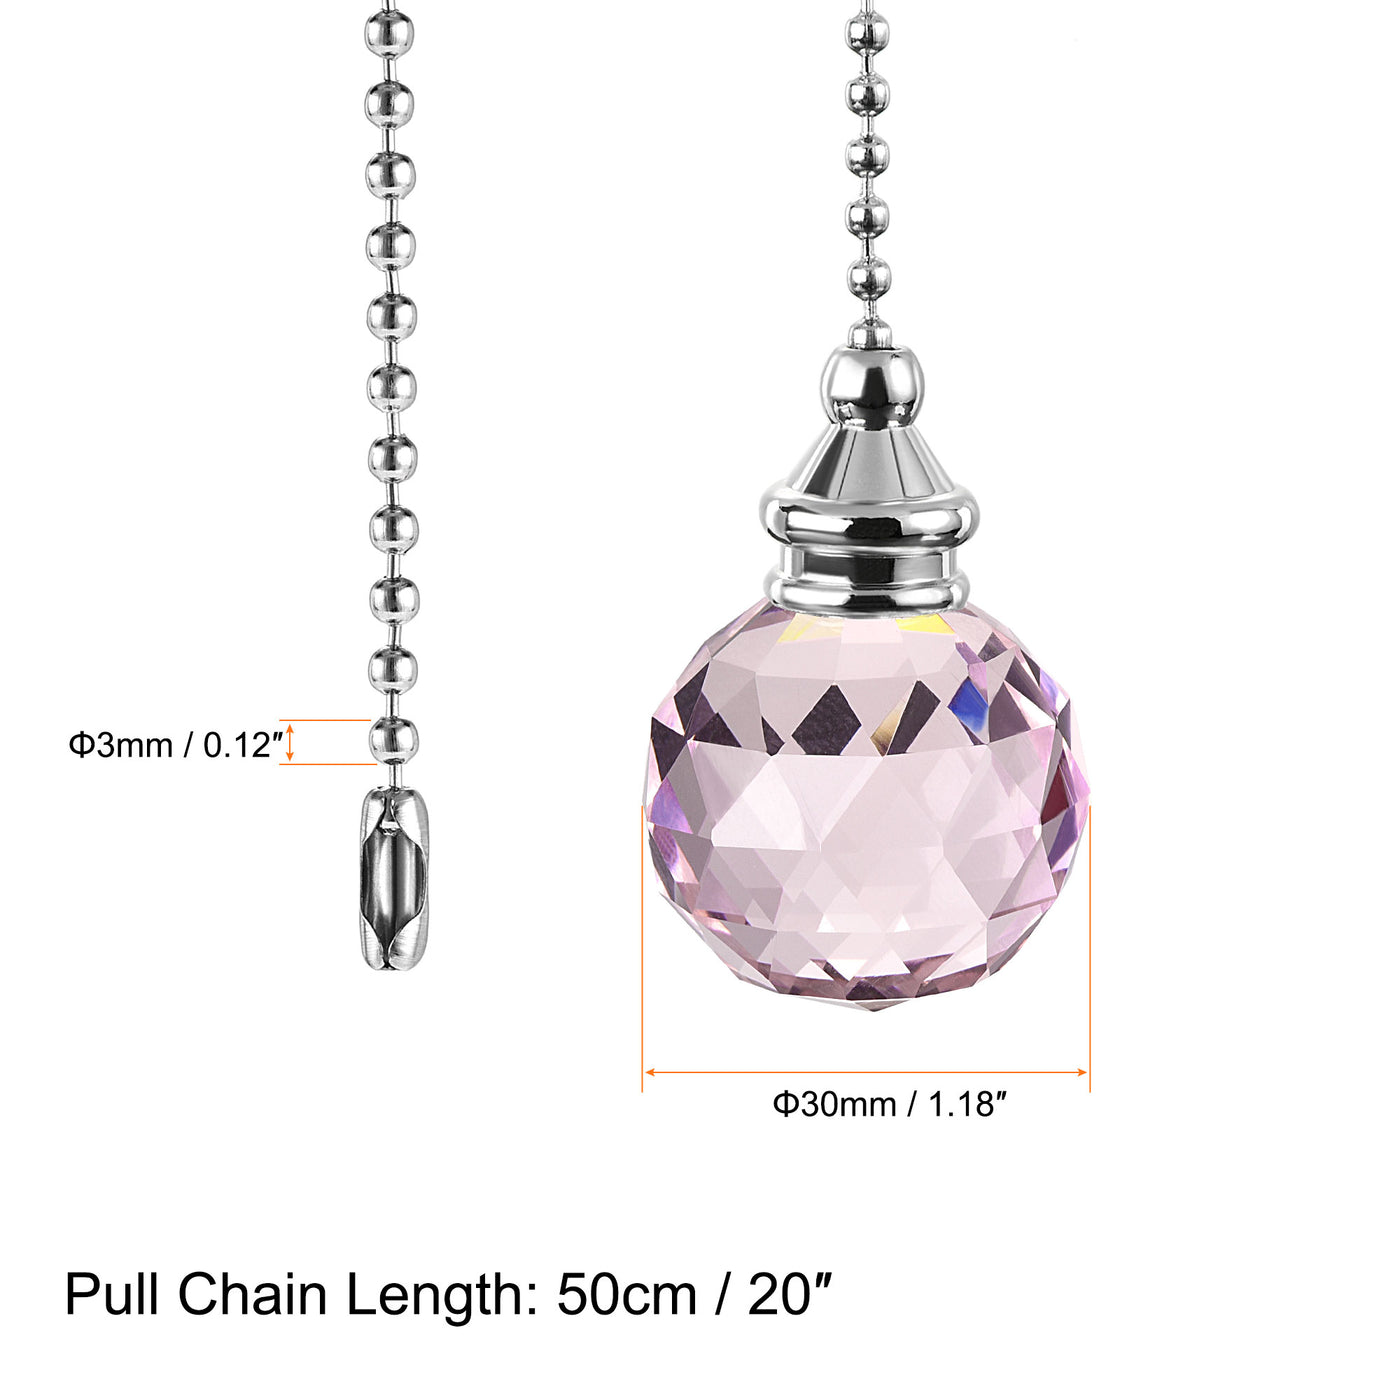 uxcell Uxcell Ceiling Fan Pull Chain, 20 Inch Nickel Finish Chain Ornament Extension, 30mm Pink Crystal Ball Pendant 2Pcs